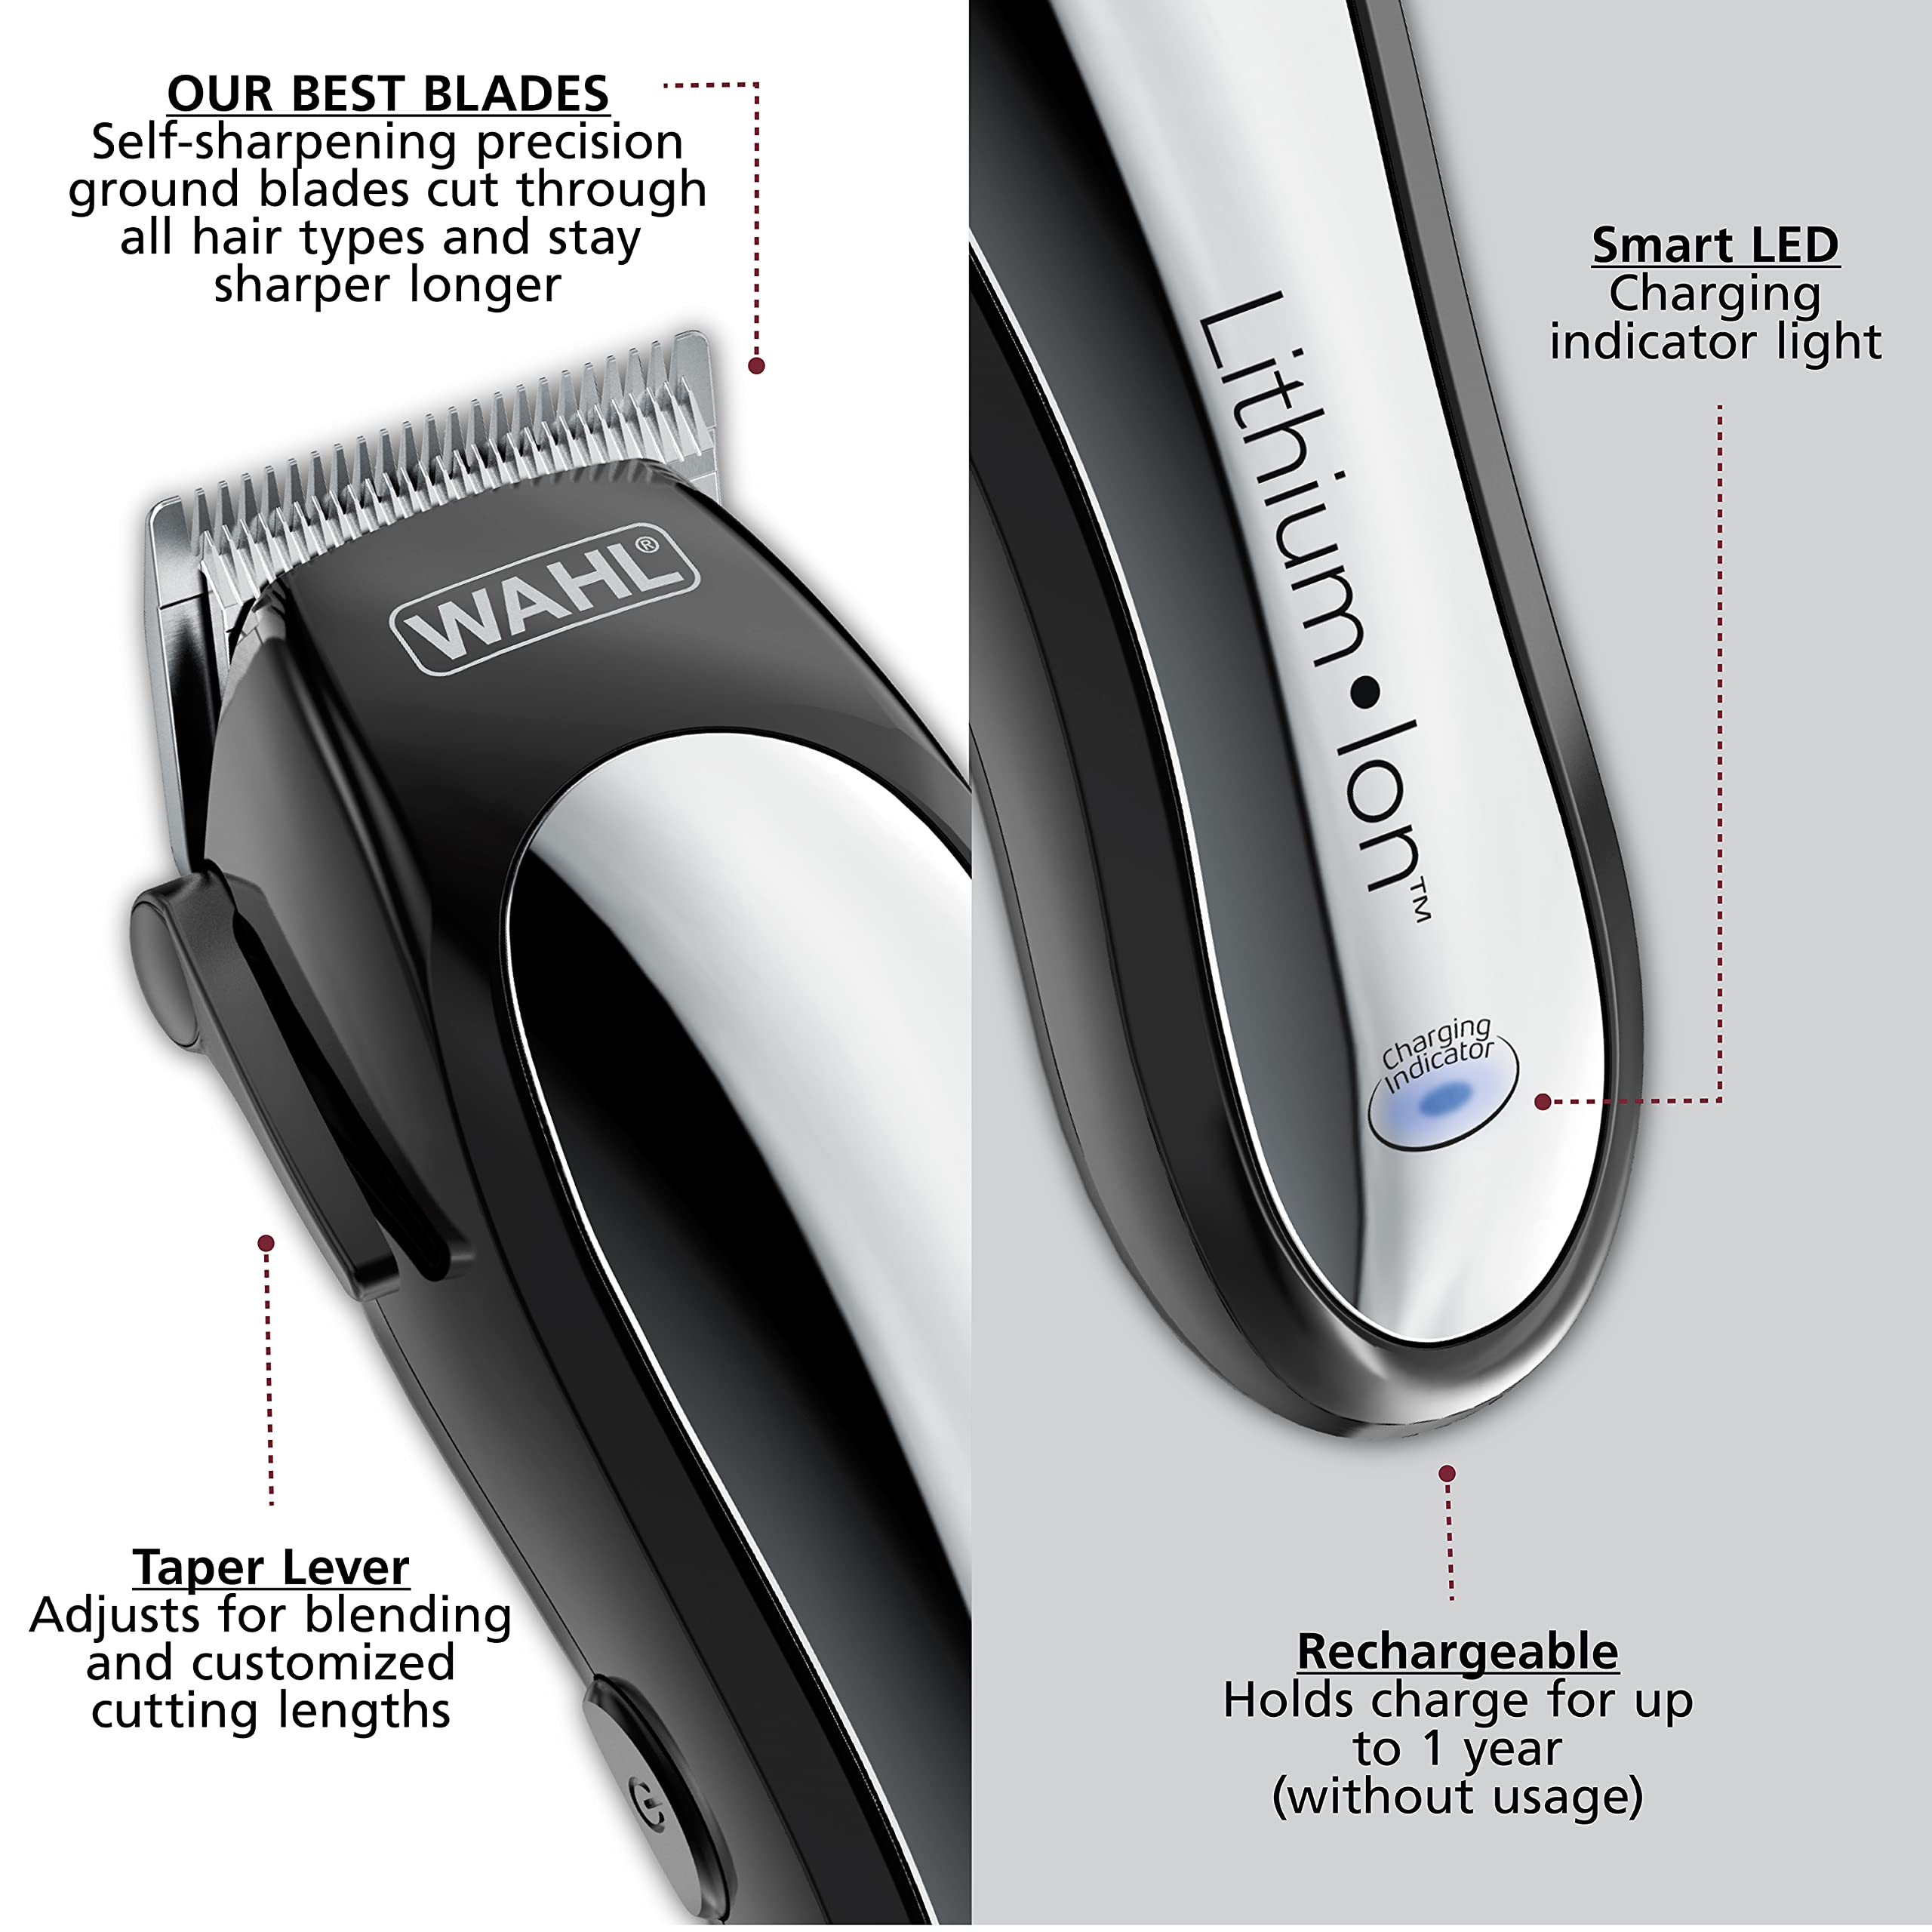 Wahl Clipper Rechargeable Lithium Ion Cordless Haircutting Clipper & Battery Trimming Combo Kit – Electric Clipper for Grooming Heads, Beards, & All Body Grooming – Model 79600-2101P